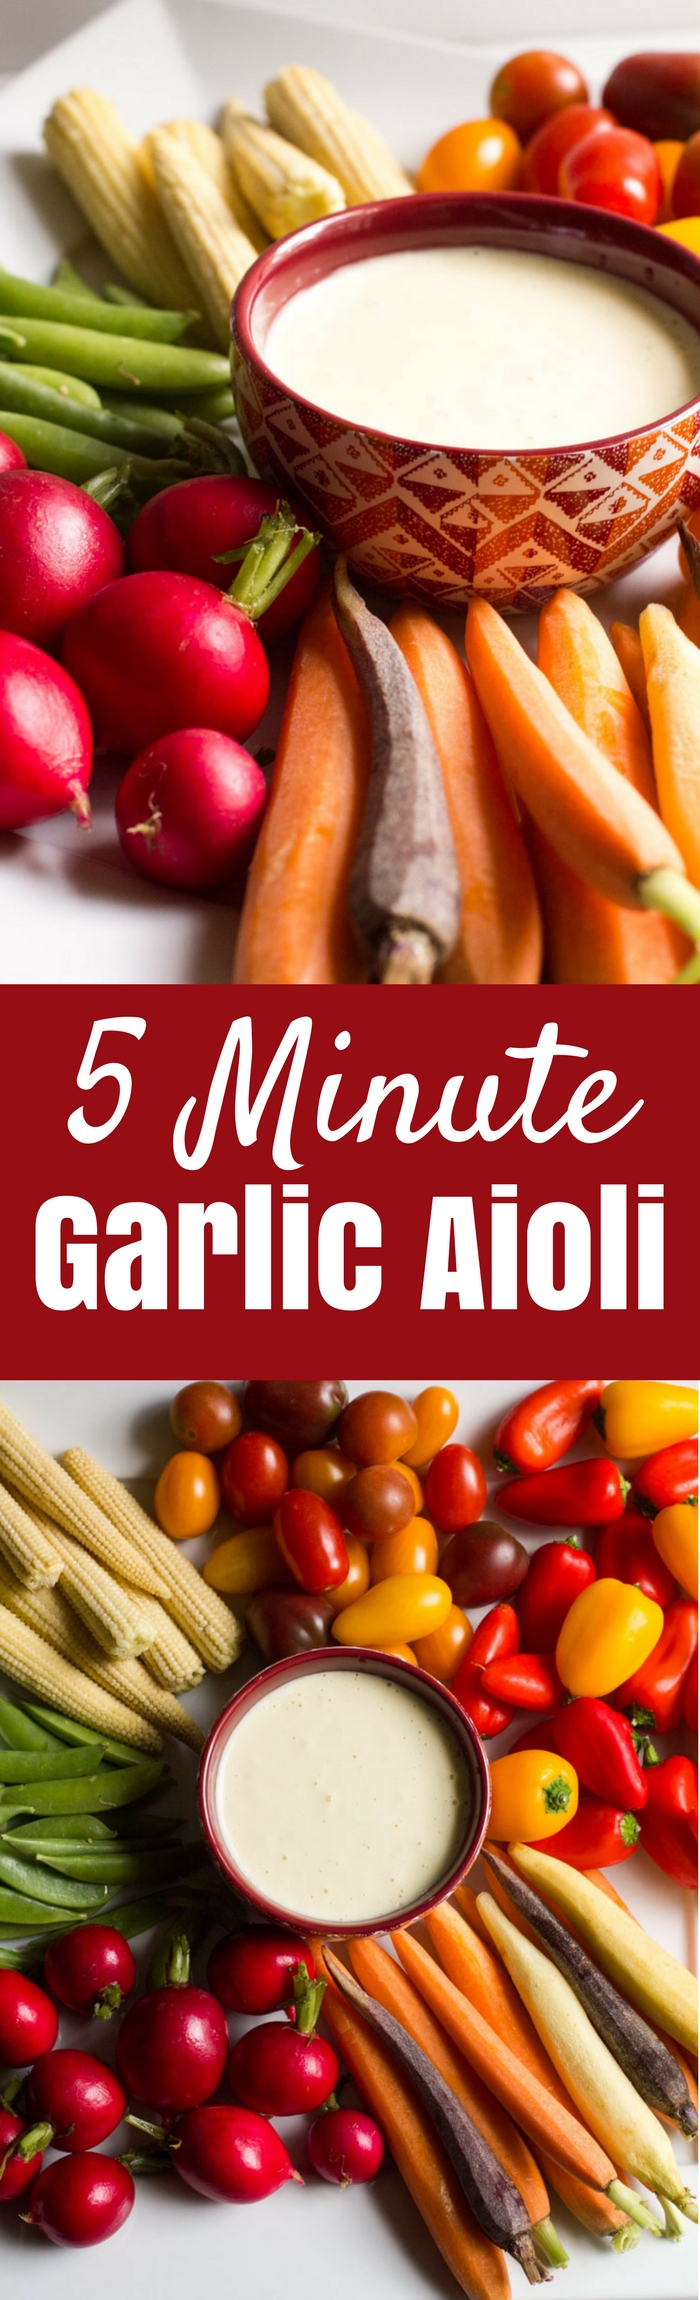 This 5 minute garlic aioli is super easy and flavorful. Perfect as a dip for veggies and fried potatoes or a spread for sandwiches.